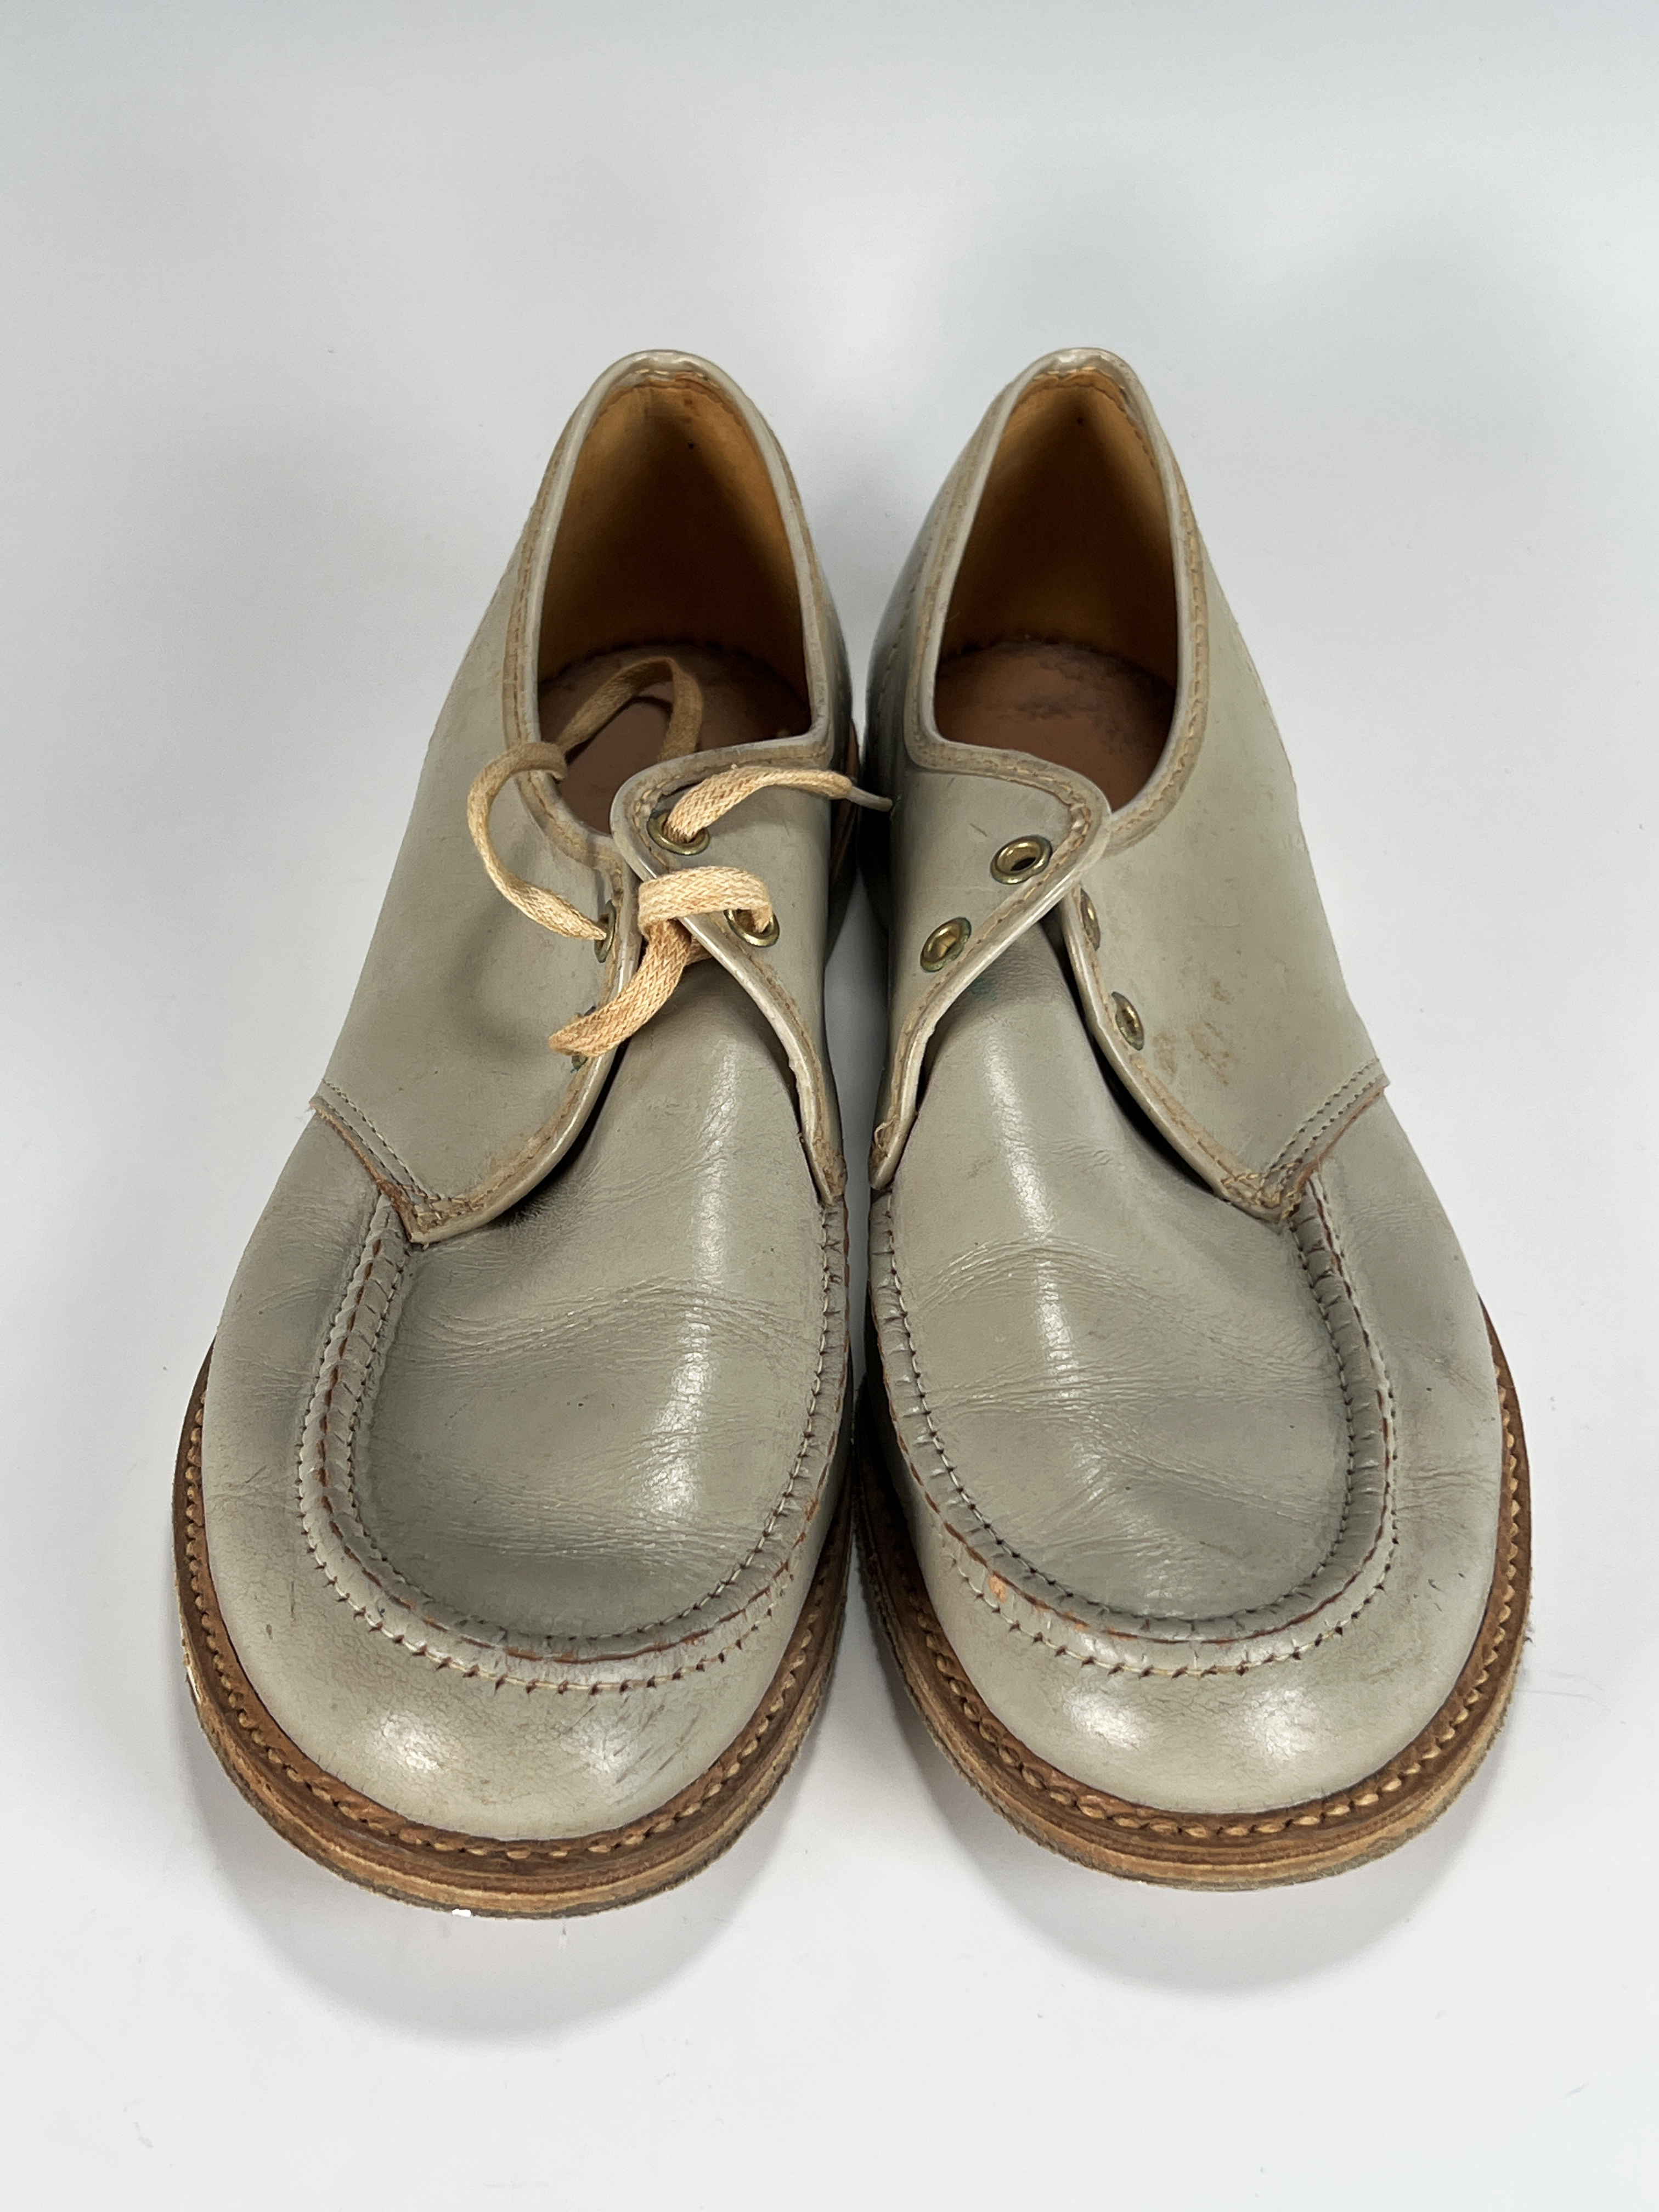 Vintage Leather Bowling Shoes image 4